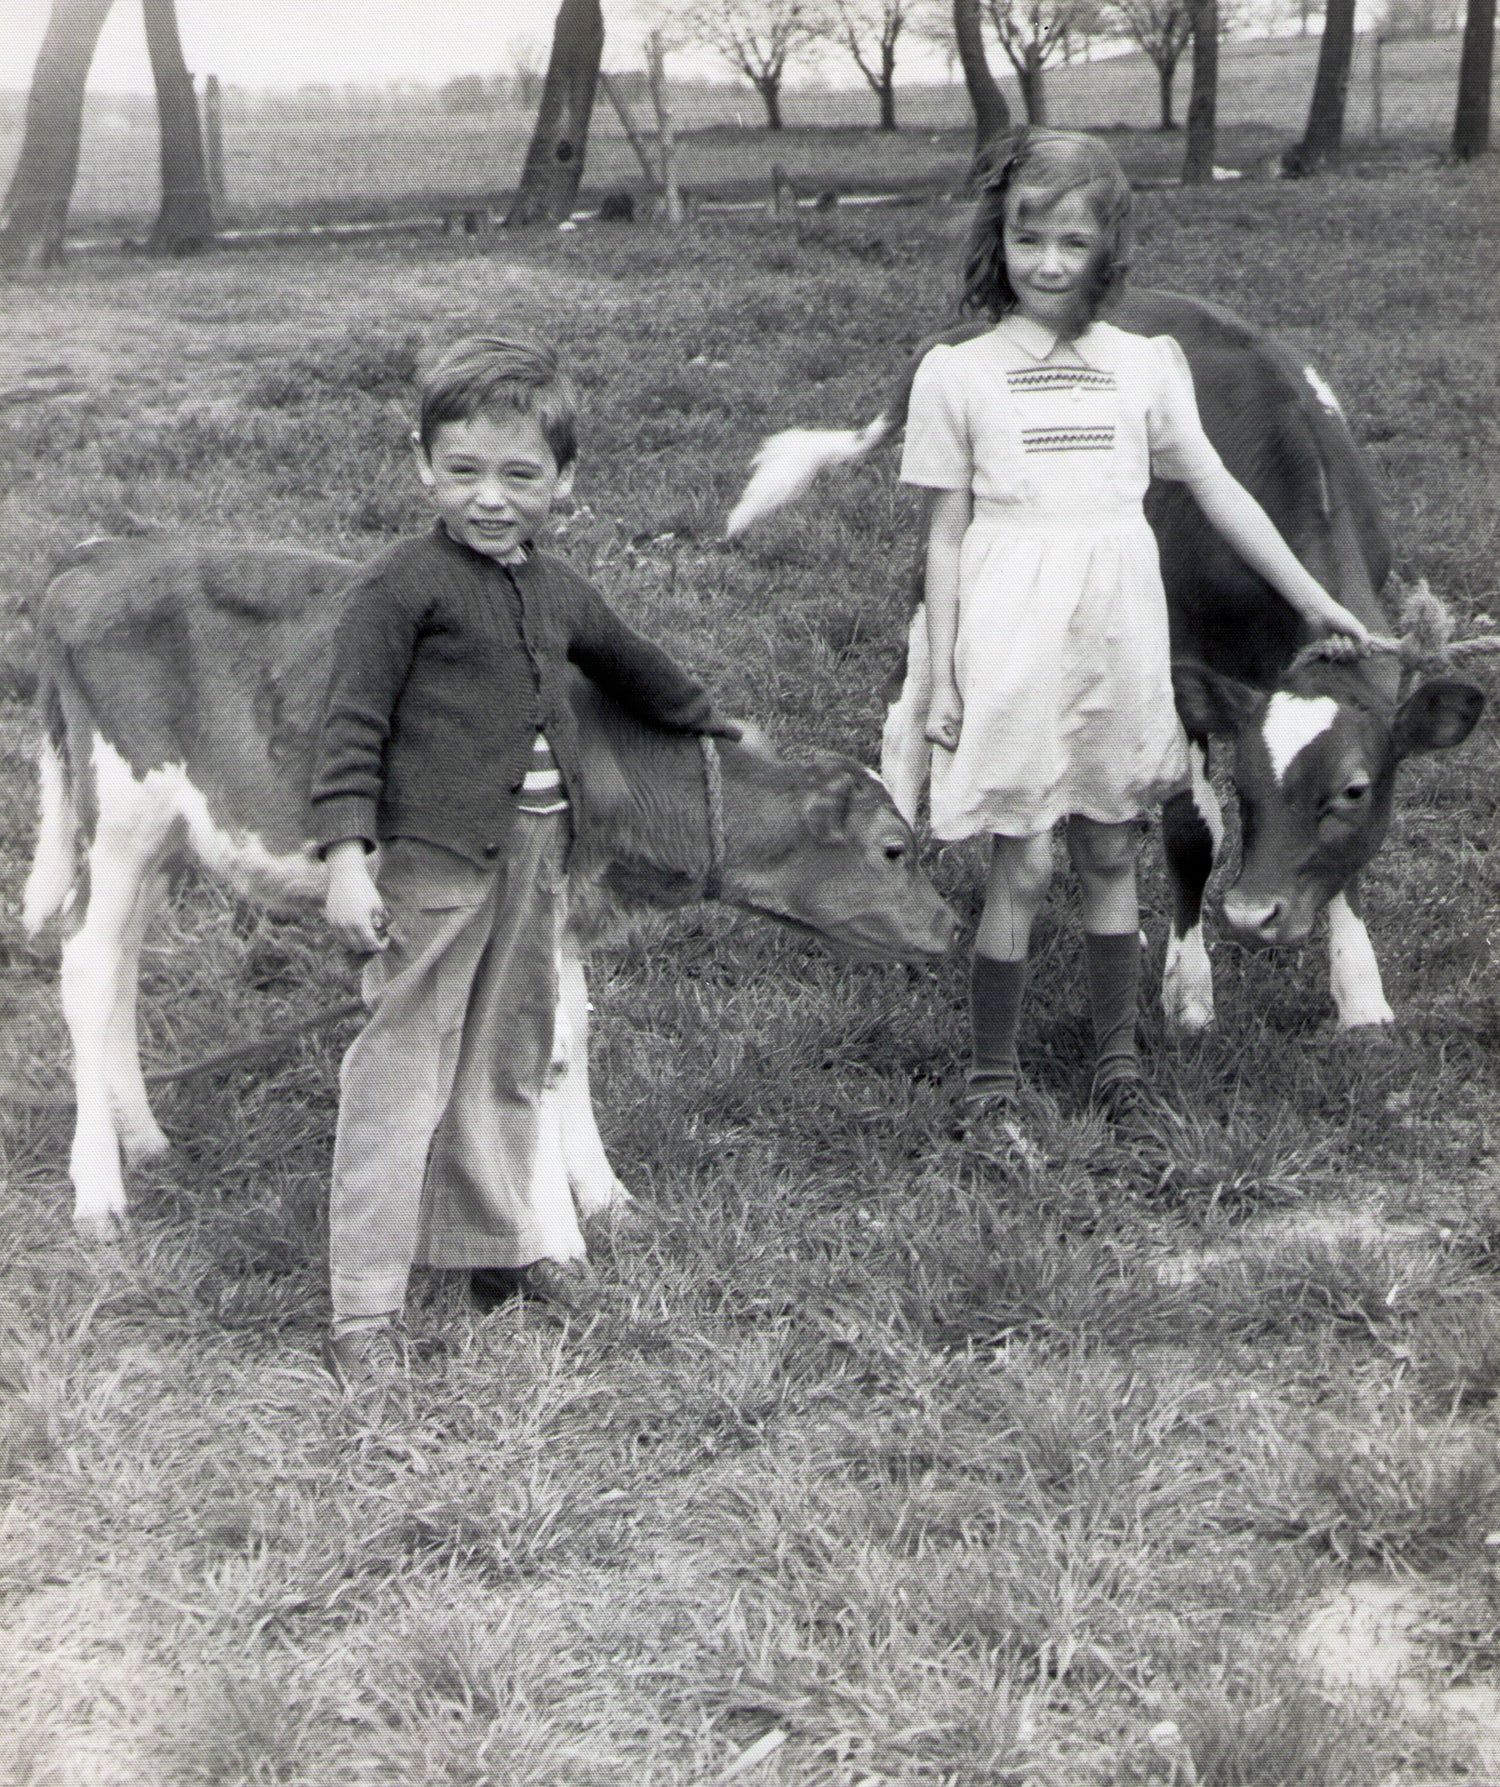 Bill Orchard and Kathryn Orchard Morrow with their Guernsey calves